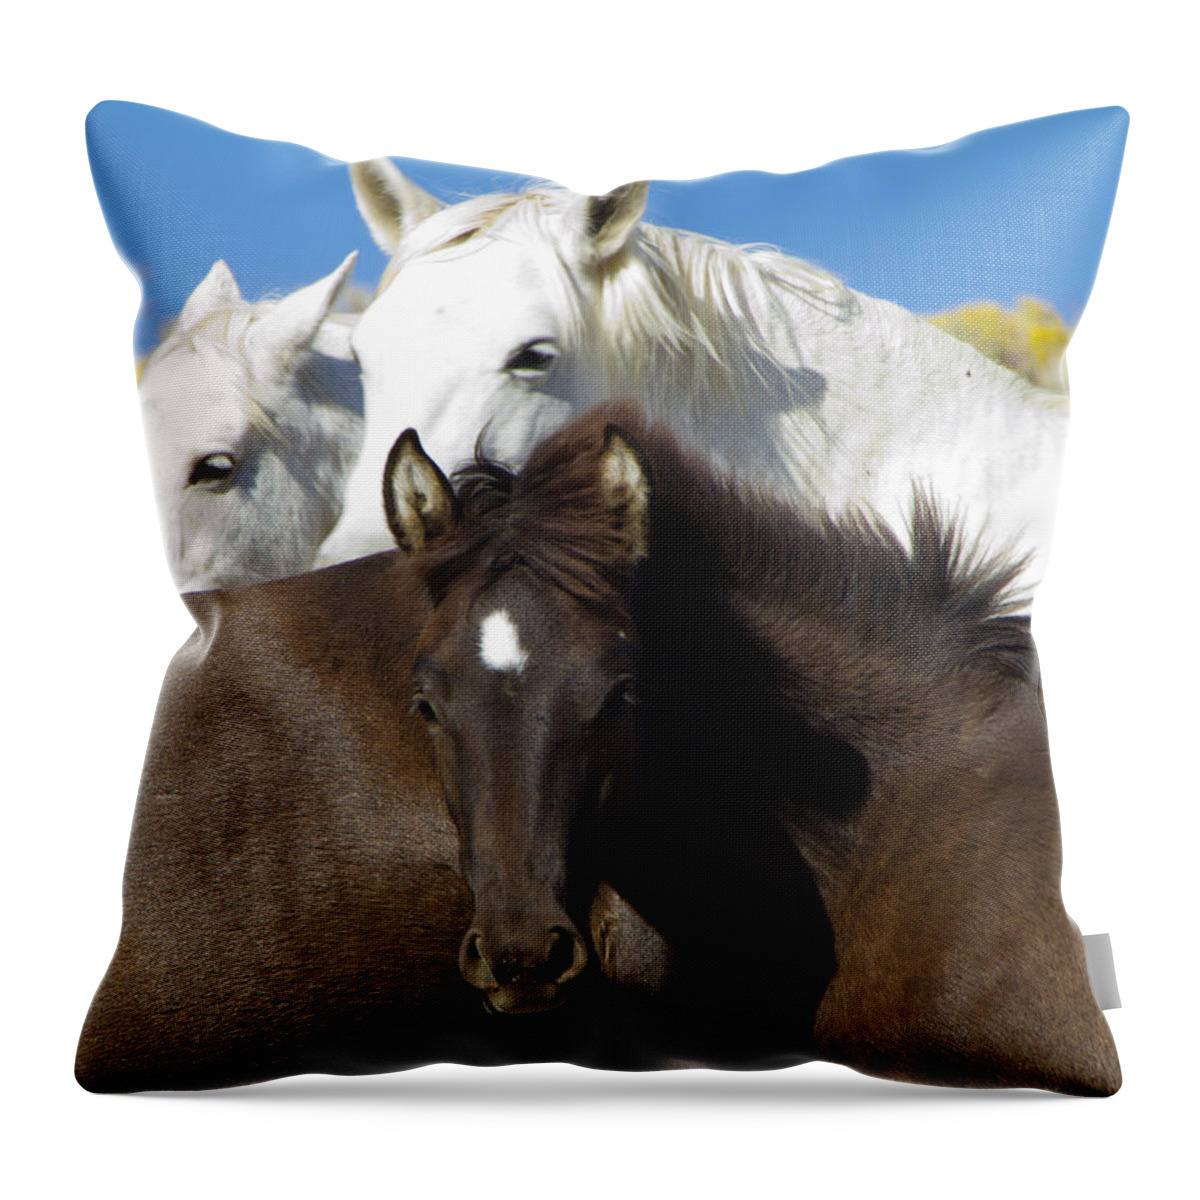 Horses Throw Pillow featuring the photograph Wild Mustang Herd by Waterdancer 